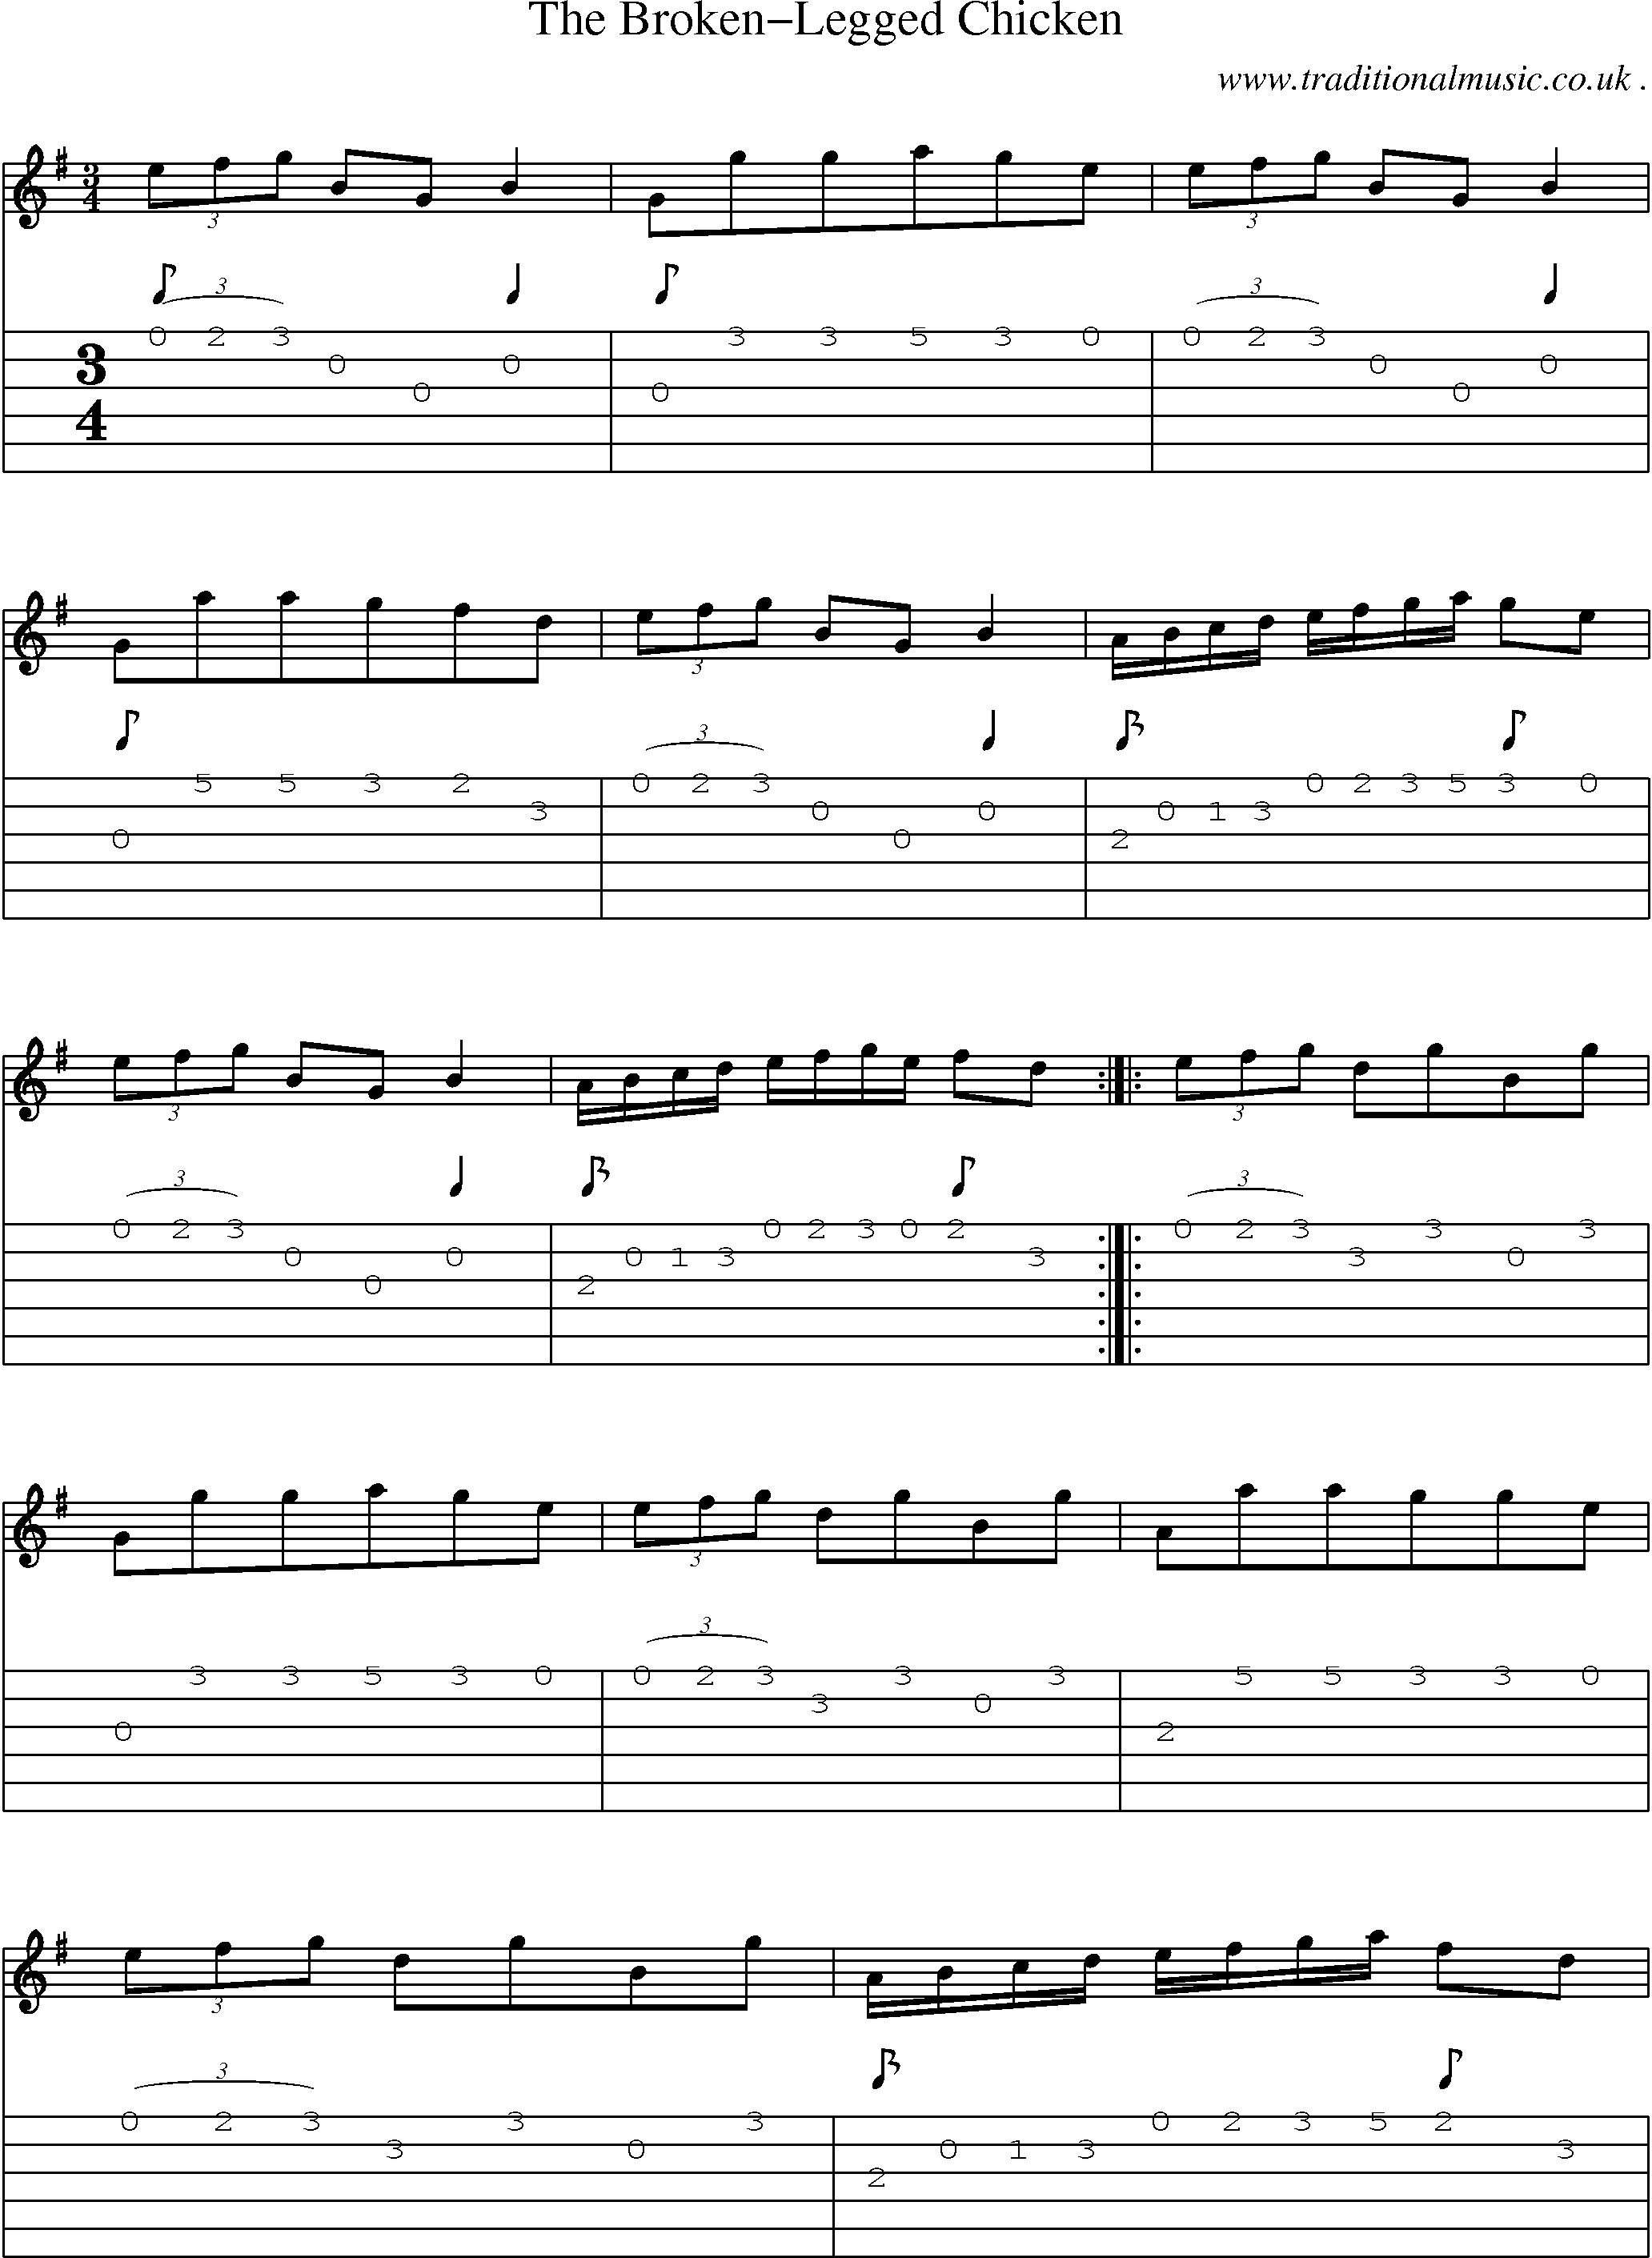 Sheet-Music and Guitar Tabs for The Broken-legged Chicken